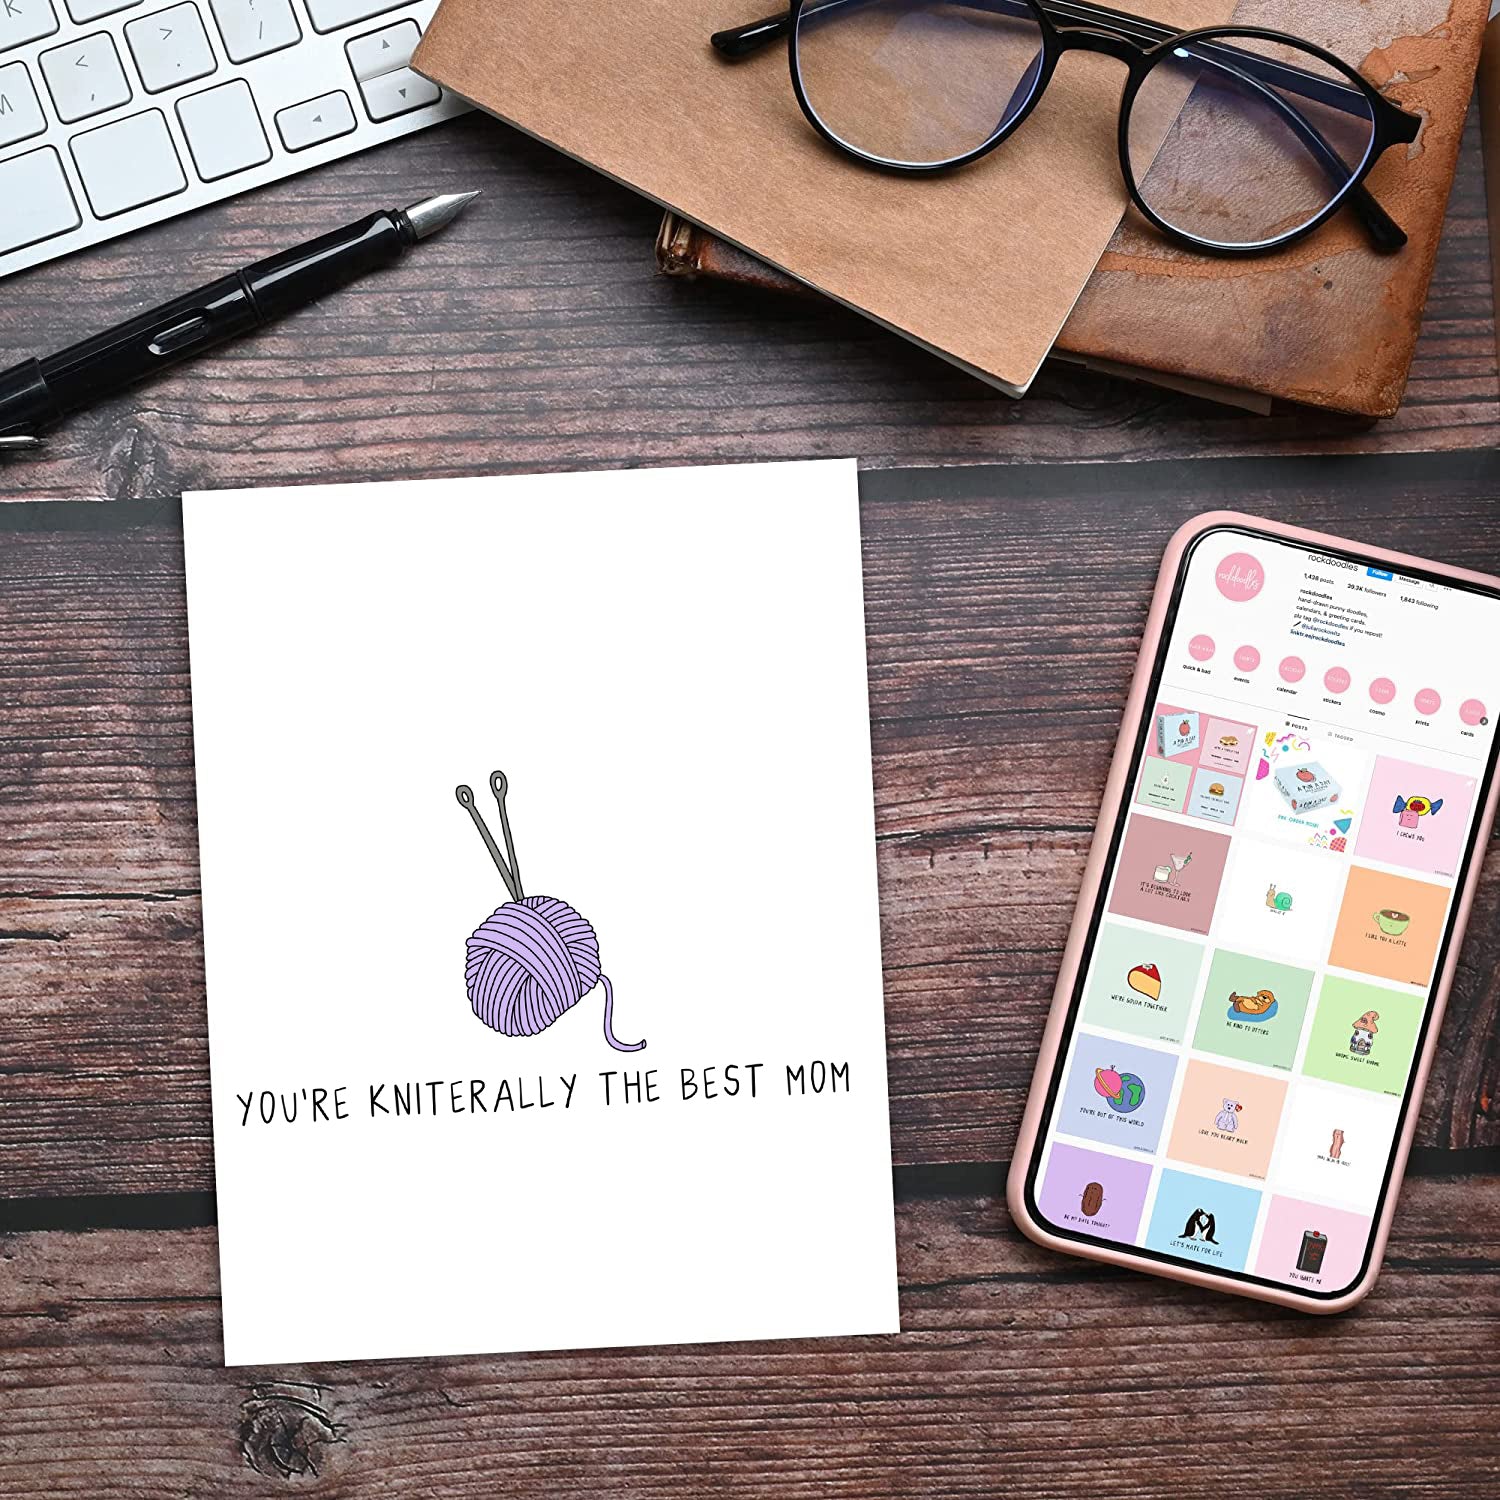 A You're Kniteraly The Best Mom card by rockdoodles featuring a knitting needle and a cell phone.